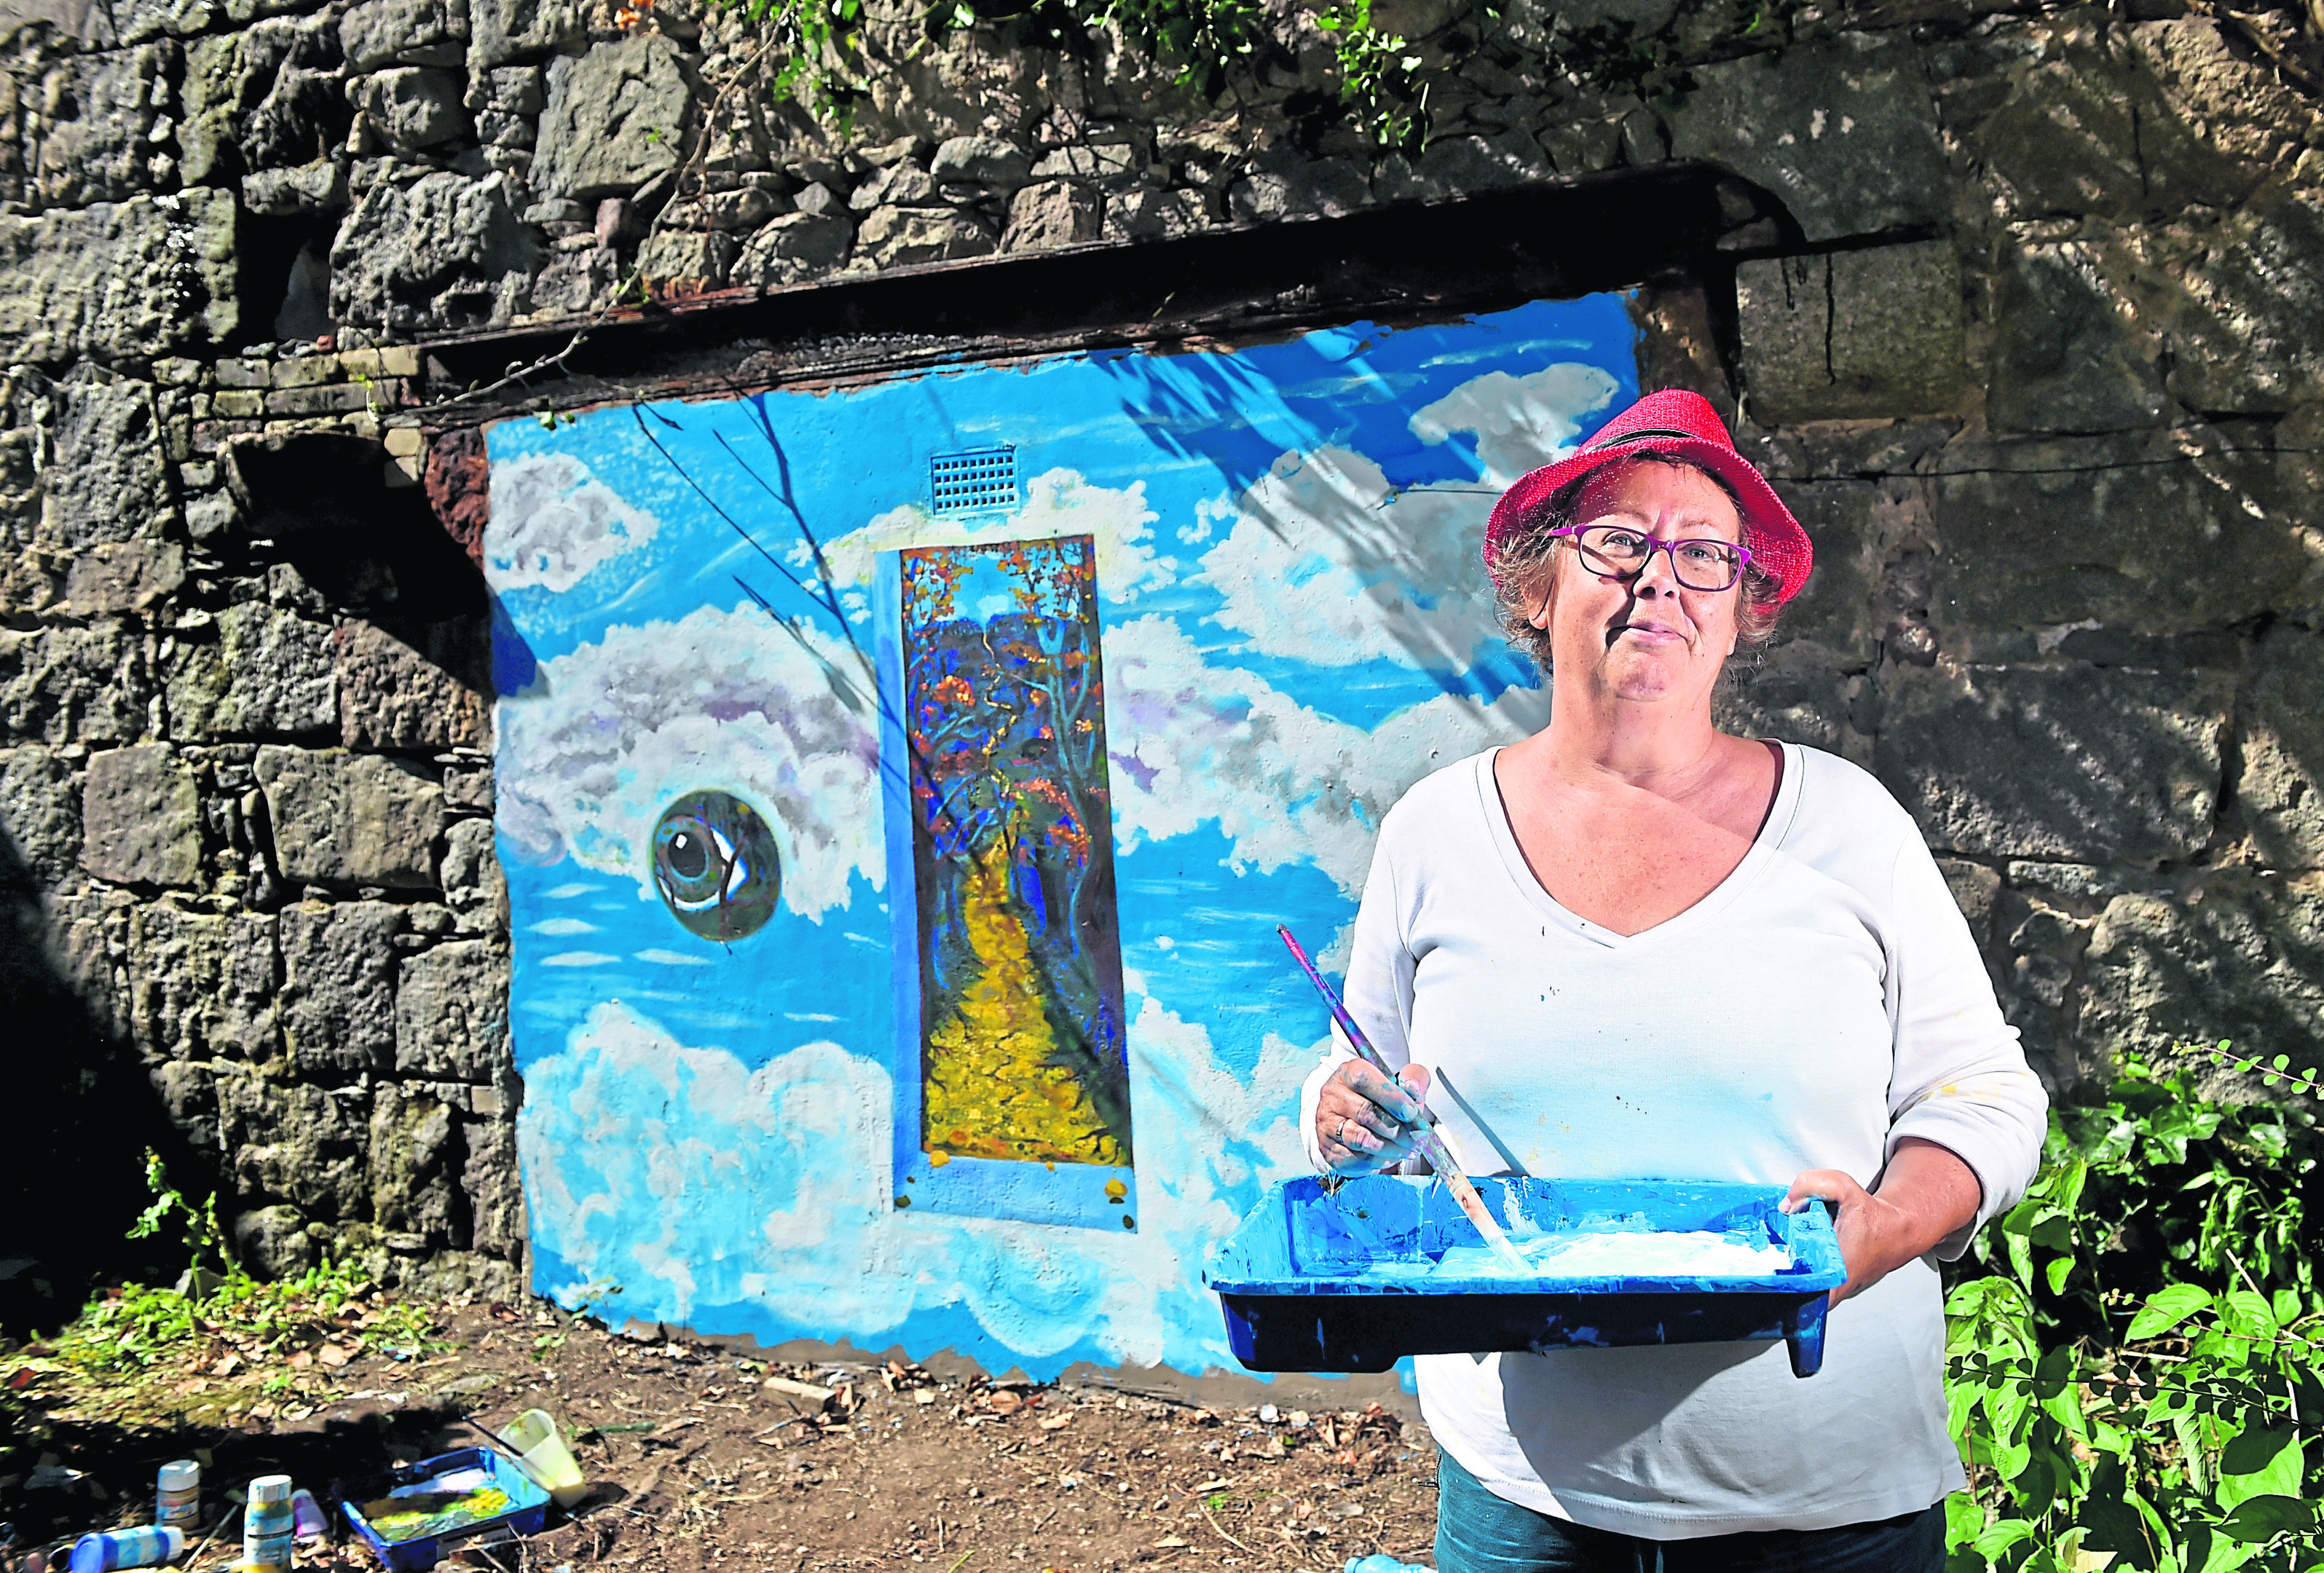 Alison Chandler, a cancer survivor, is finishing her art installation today that depicts the importance of bravery through her treatment on South College Street